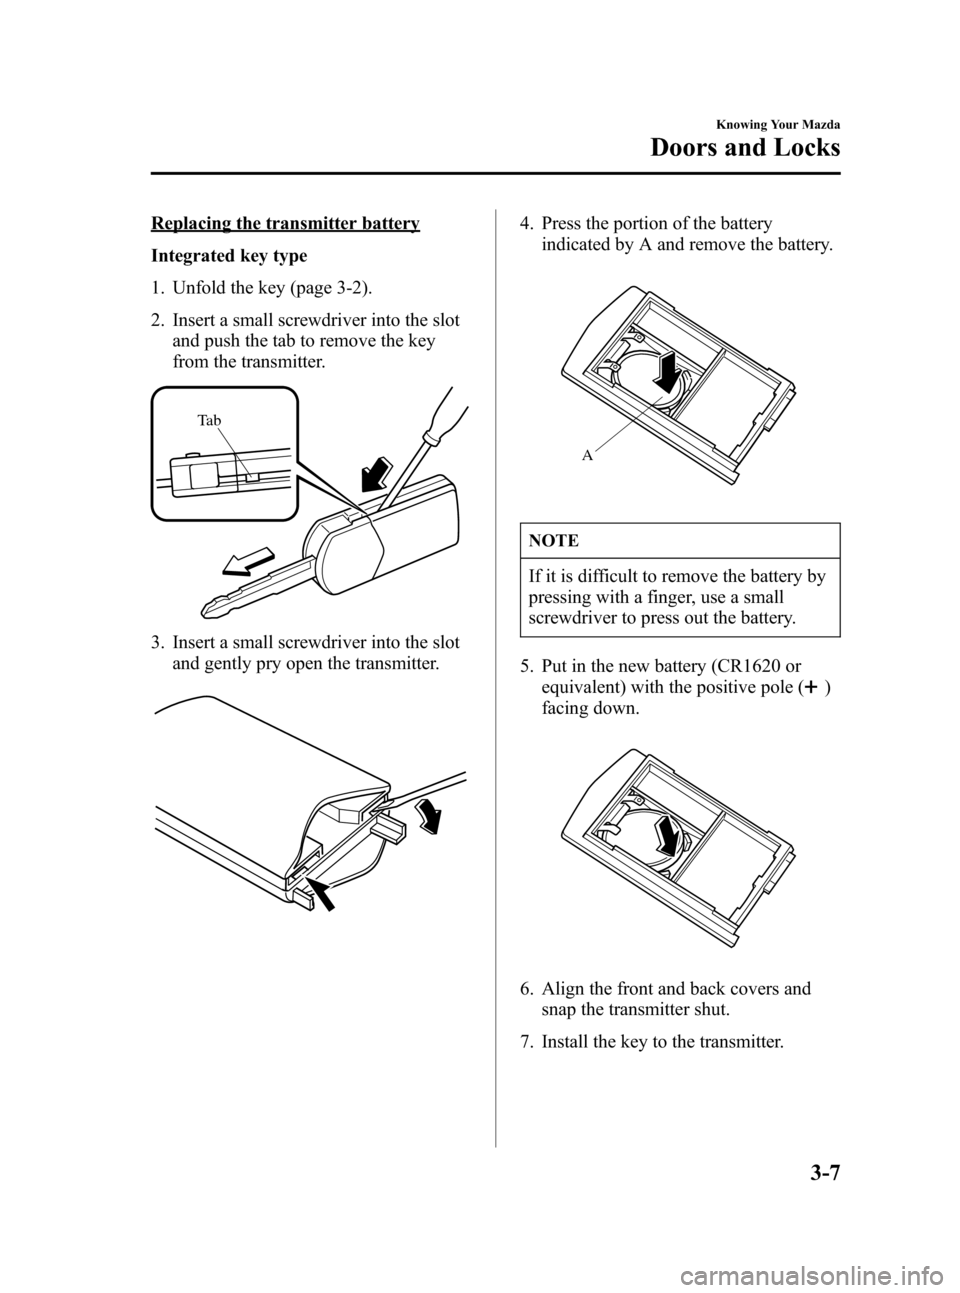 MAZDA MODEL 3 HATCHBACK 2007  Owners Manual (in English) Black plate (81,1)
Replacing the transmitter battery
Integrated key type
1. Unfold the key (page 3-2).
2. Insert a small screwdriver into the slot
and push the tab to remove the key
from the transmitt